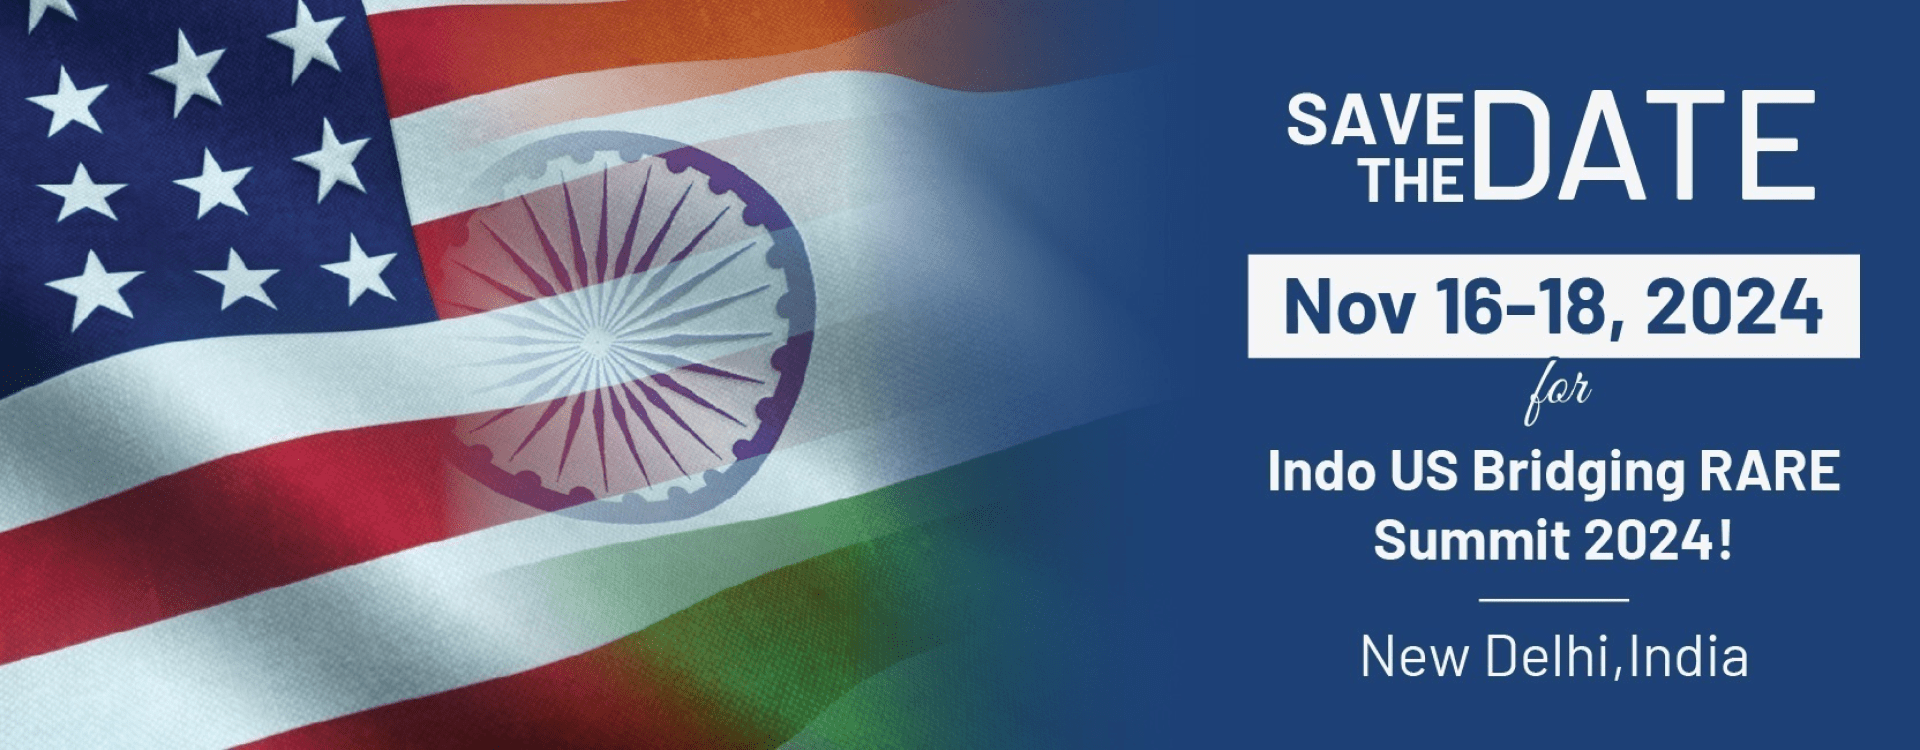 The Save the Date banner of the Indo US Bridging RARE Summit 2024 on November 16 – 18, 2024.